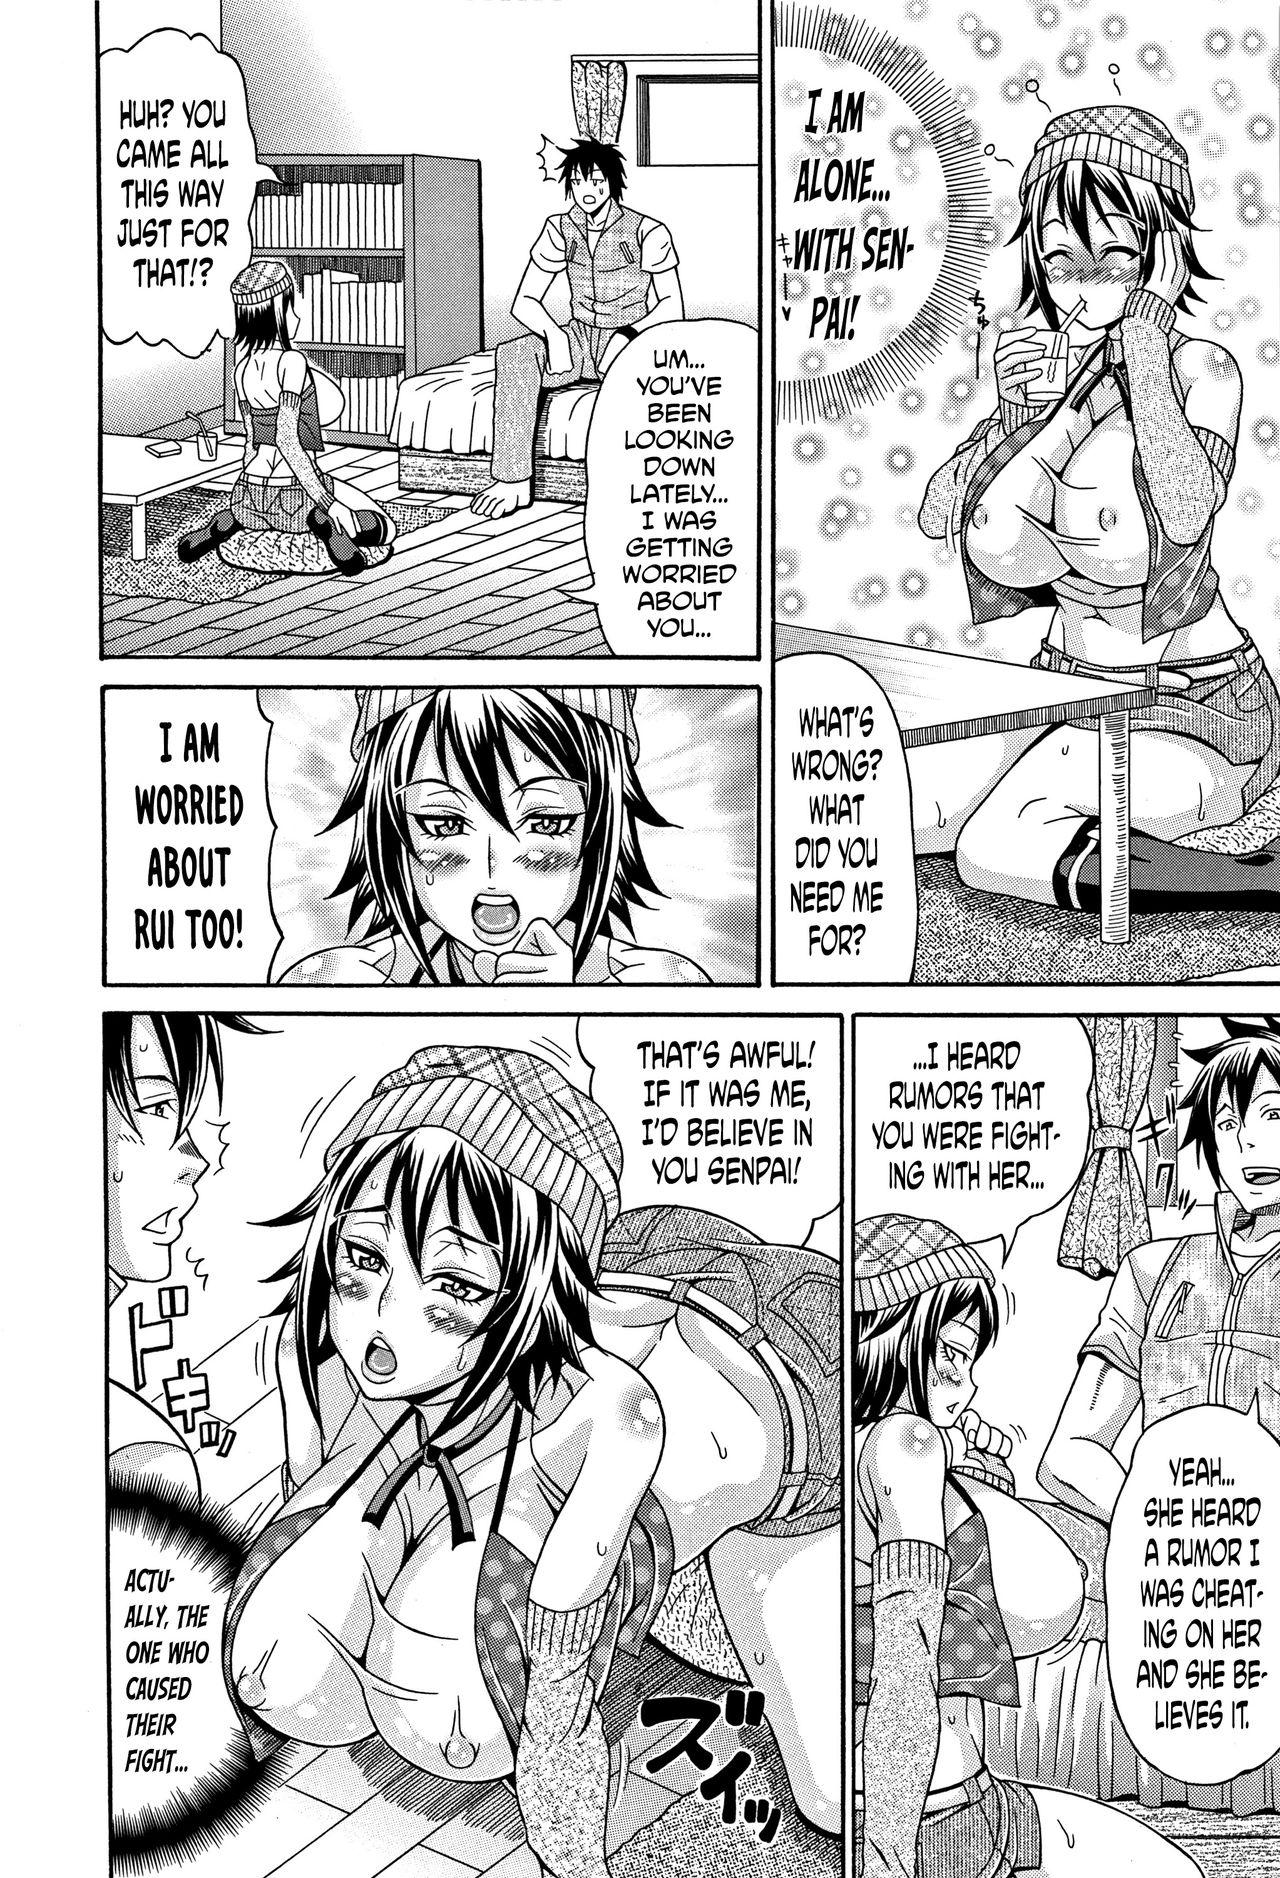 [Andou Hiroyuki] Mamire Chichi - Sticky Tits Feel Hot All Over. Ch.1-6 [English] [doujin-moe.us] 56